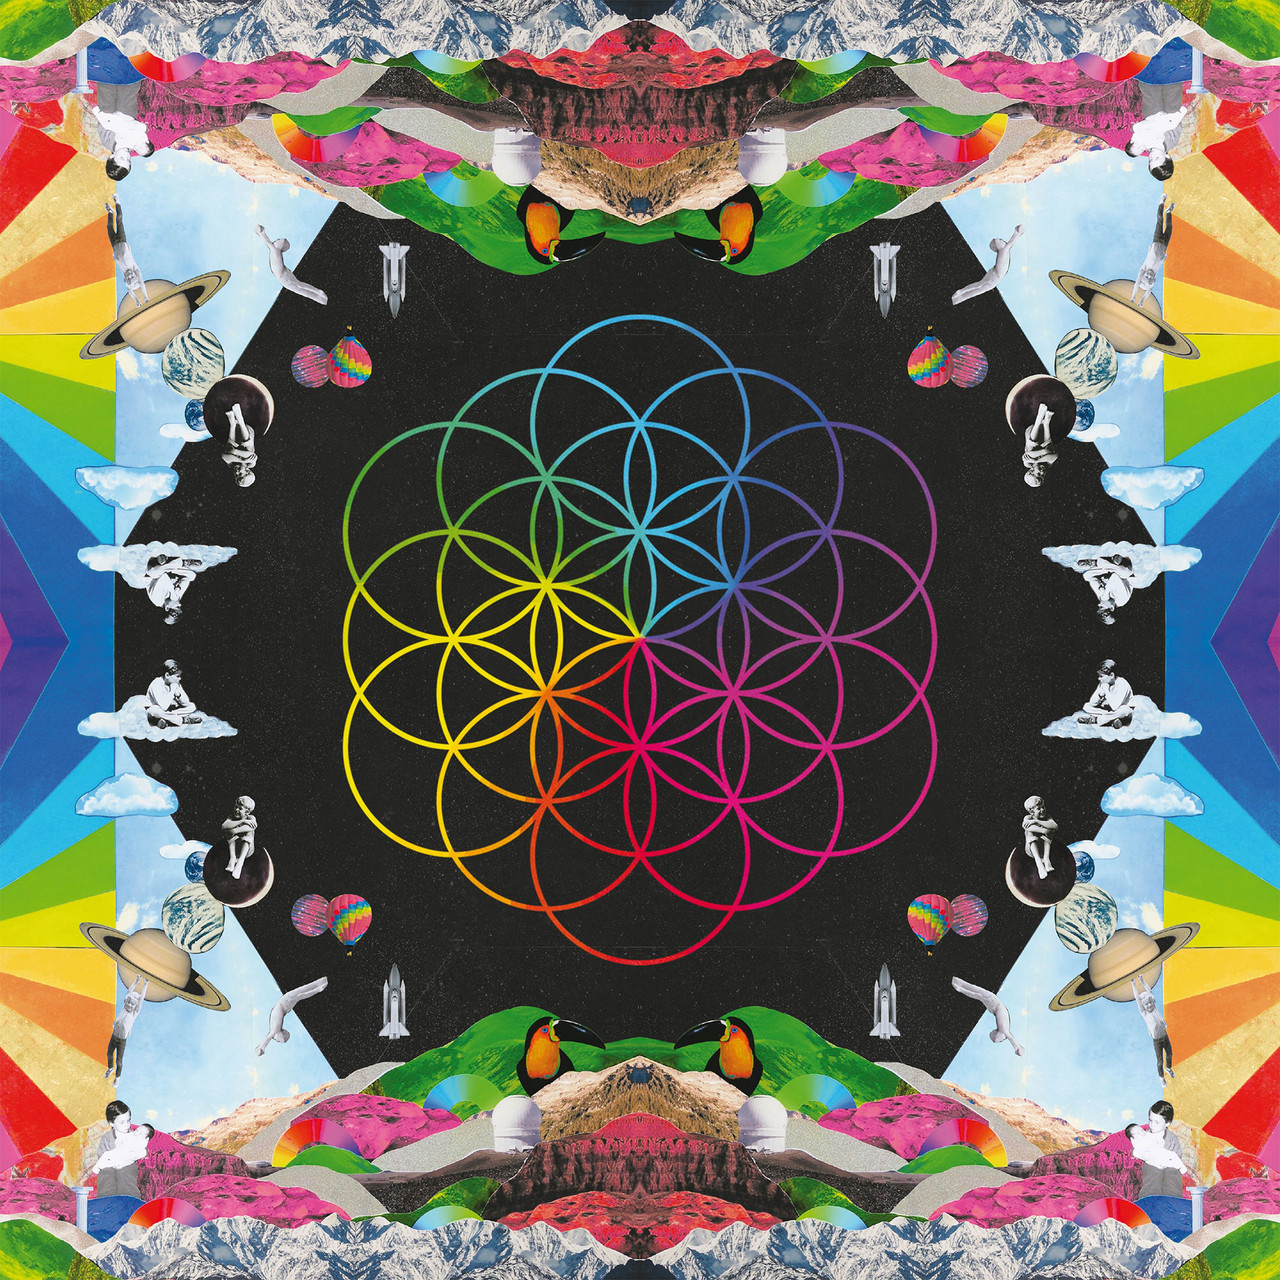 Coldplay A Head Full of Dreams LP (Recycled Color Vinyl)